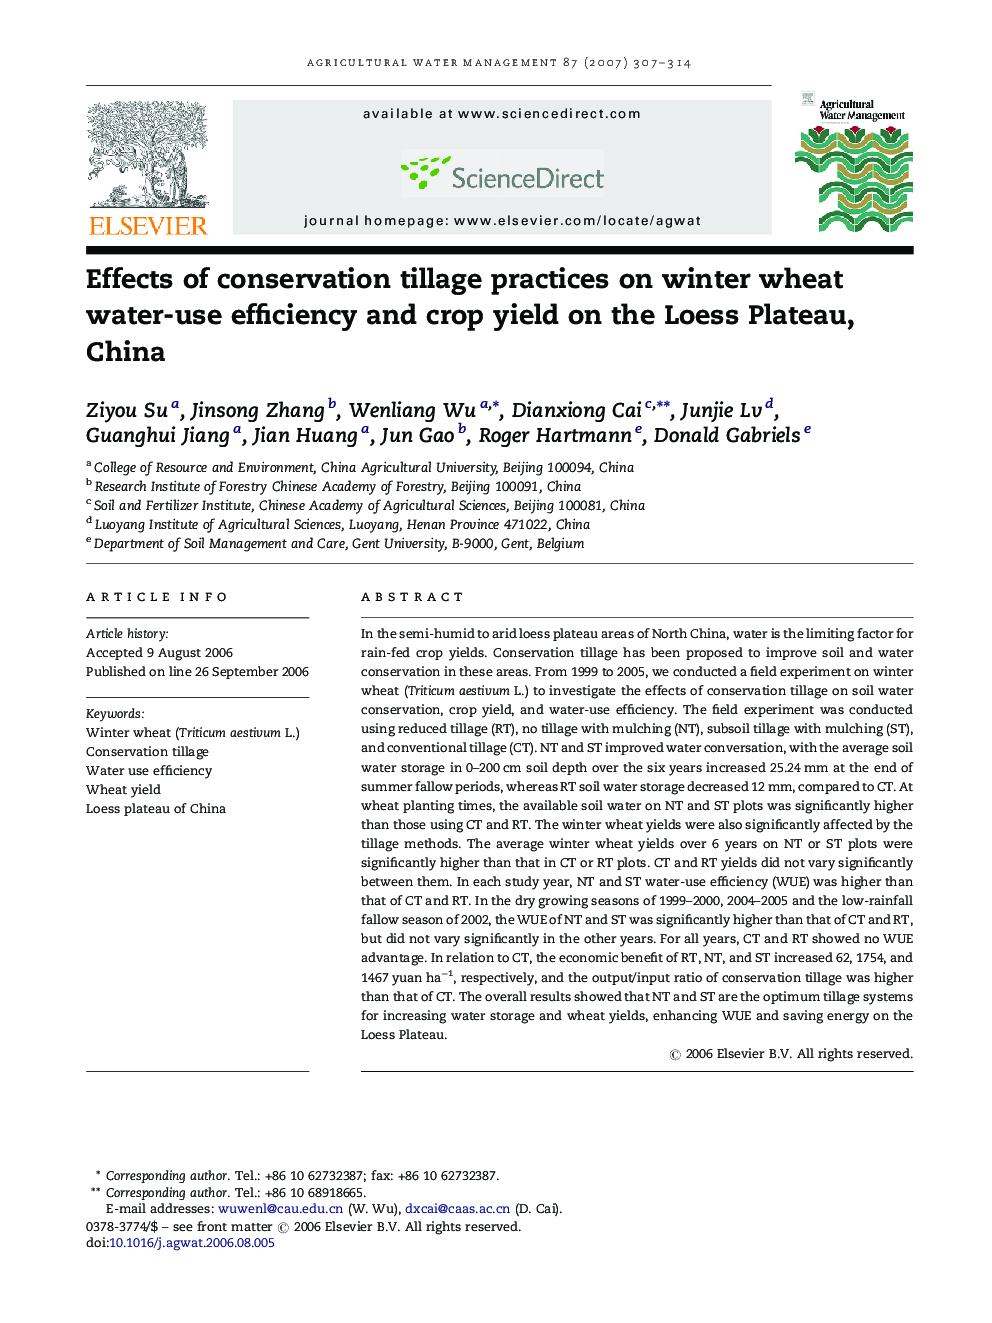 Effects of conservation tillage practices on winter wheat water-use efficiency and crop yield on the Loess Plateau, China